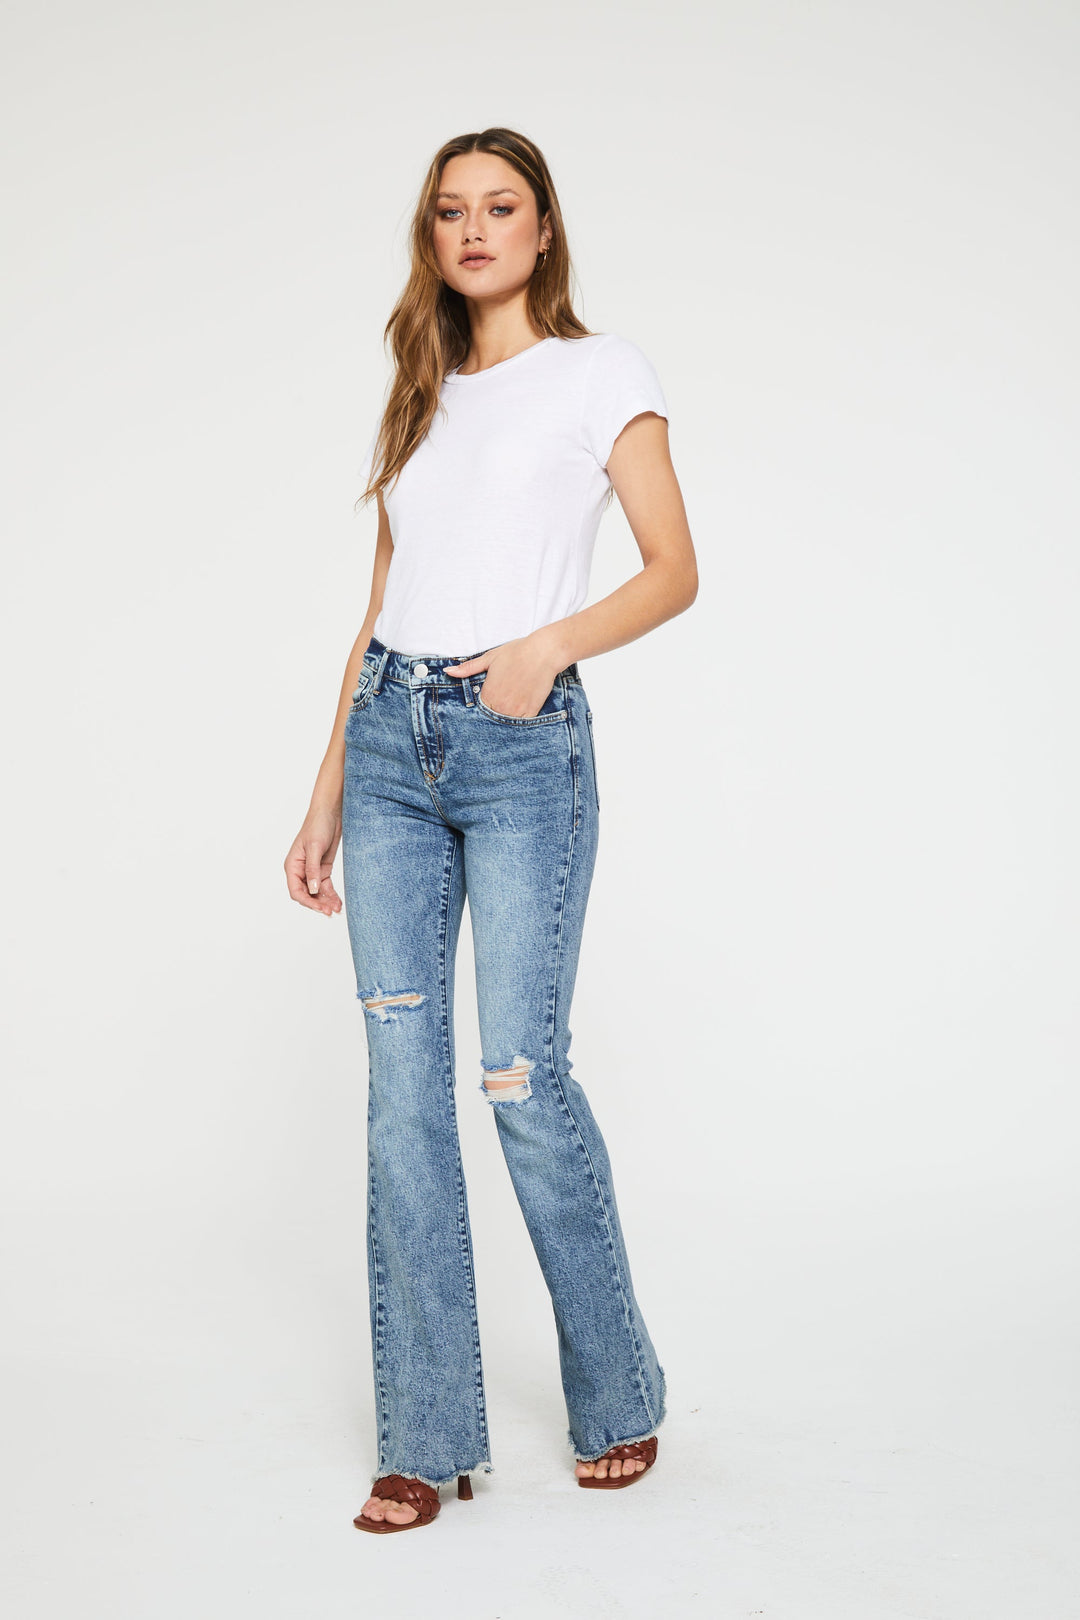 image of a female model wearing a JAXTYN HIGH RISE BOOTCUT JEANS NORWOOD JEANS